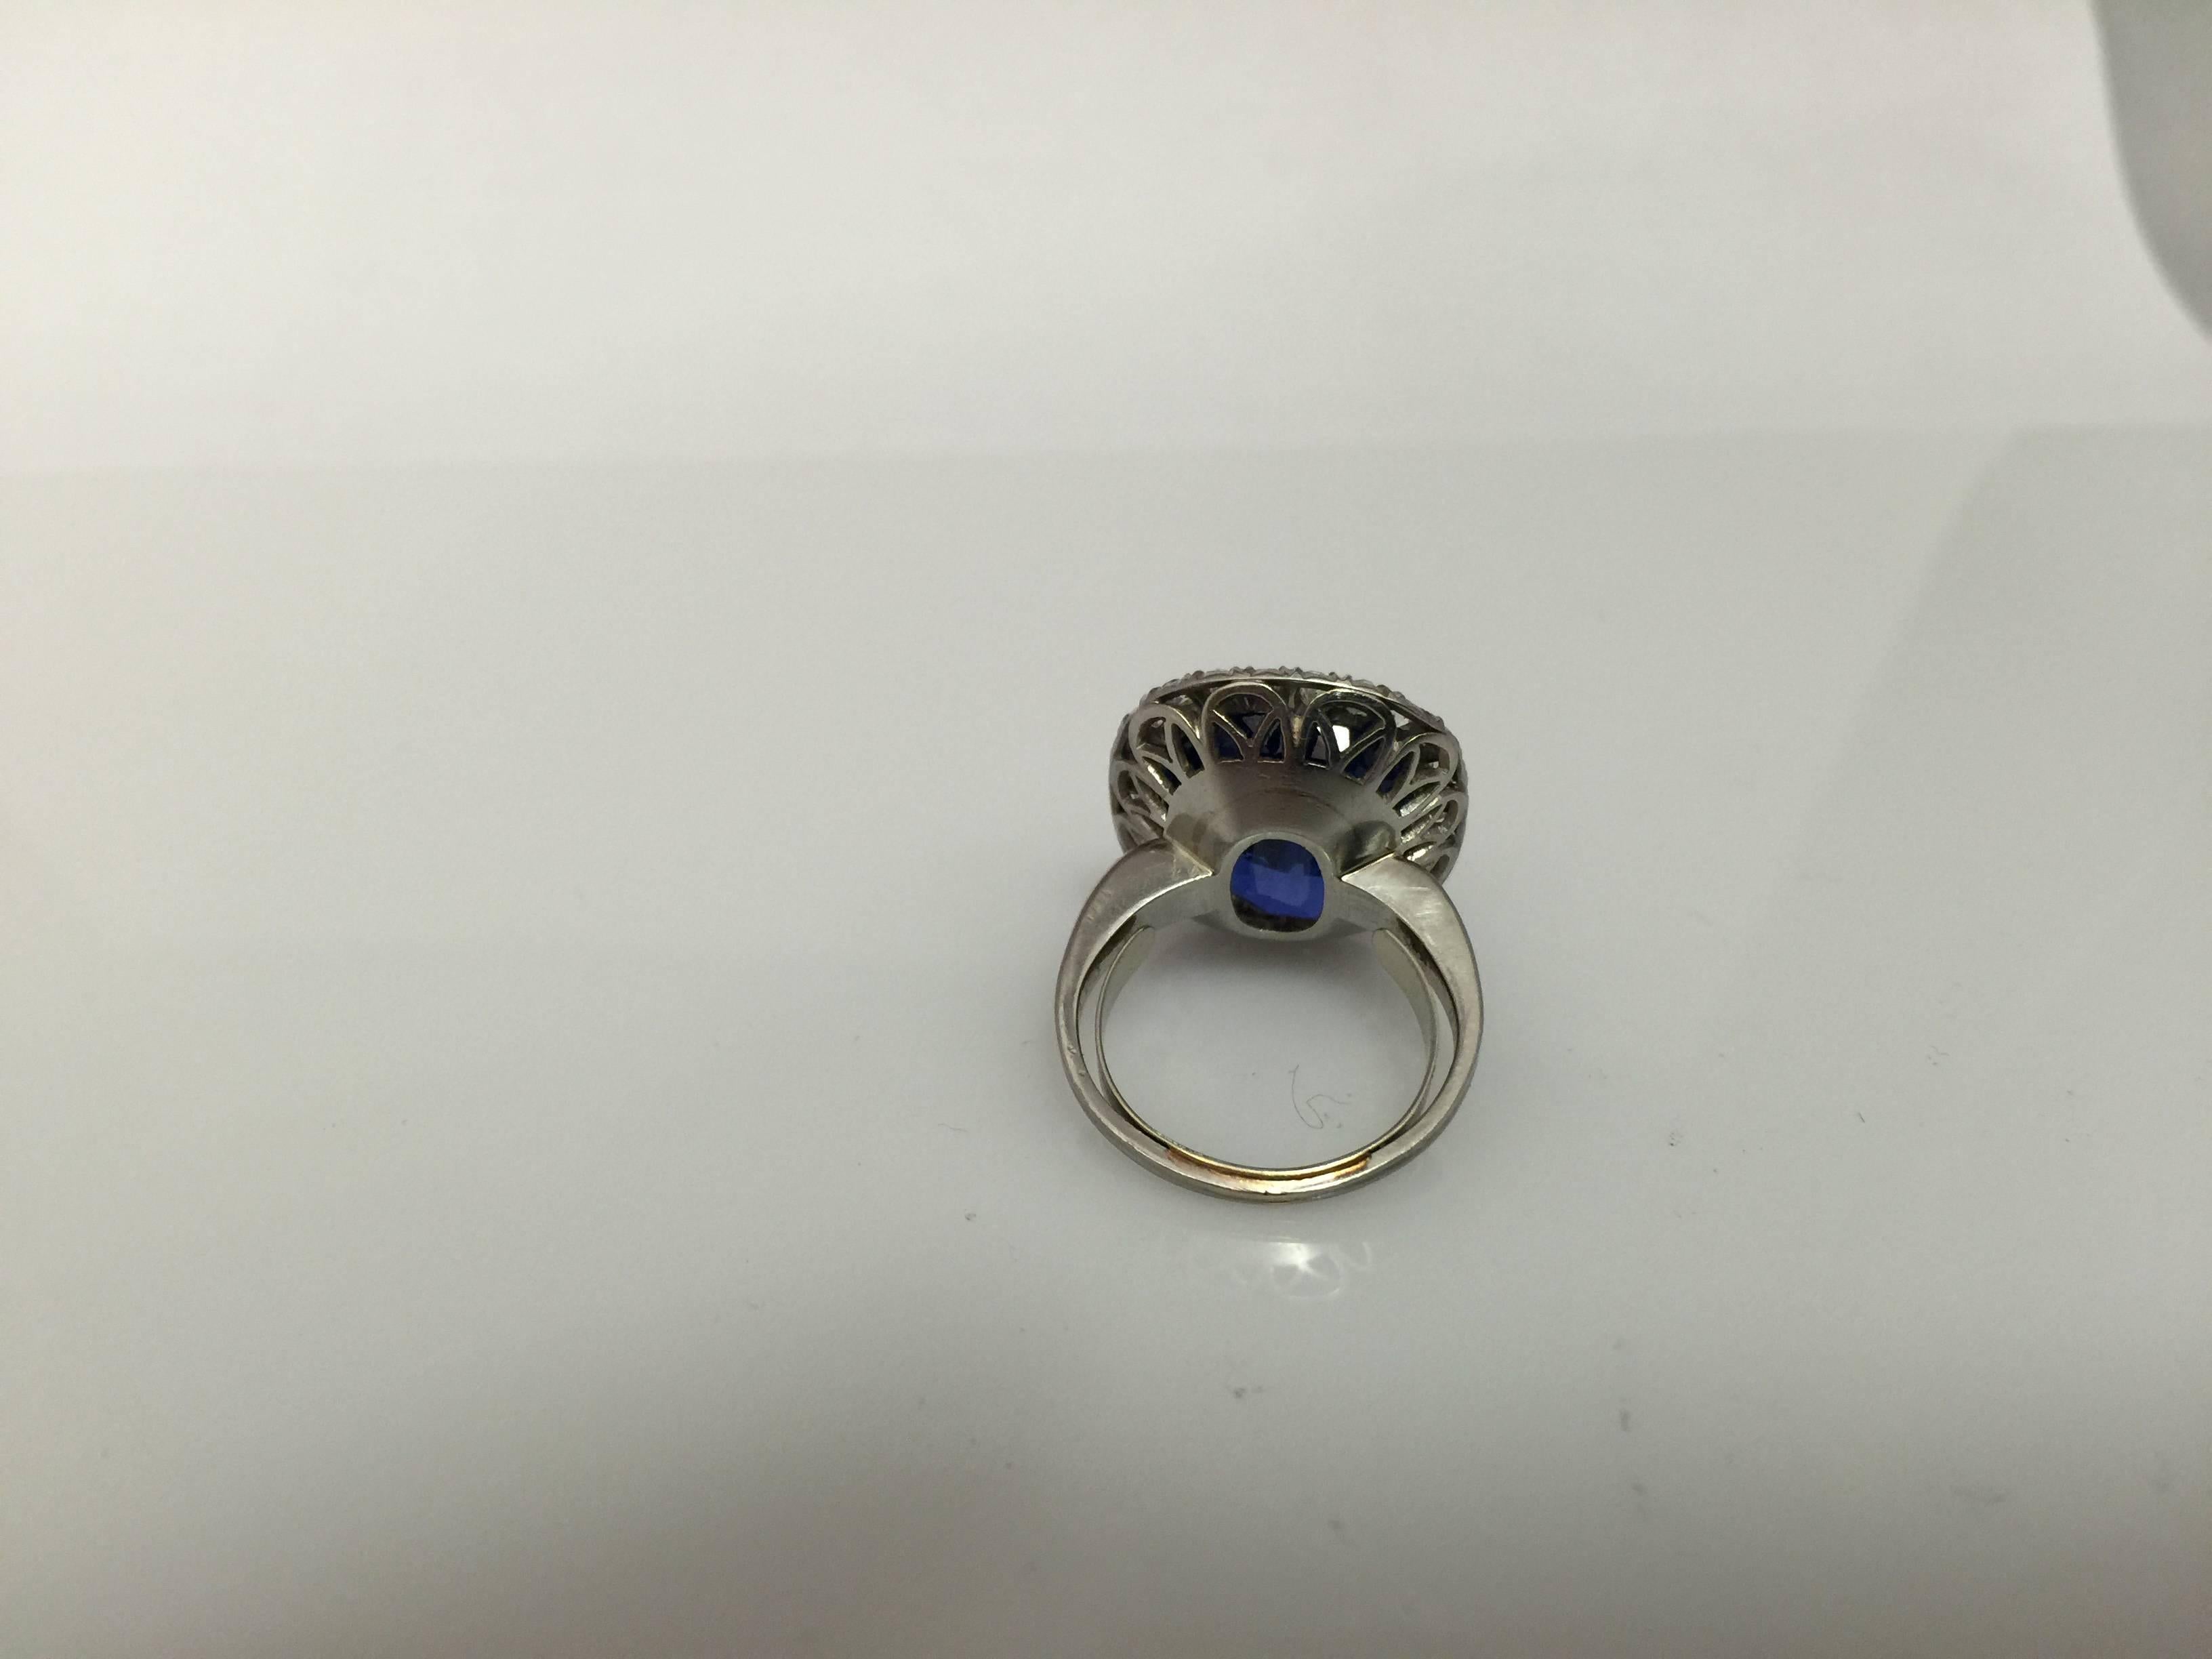 Extremely rare one of a kind GIA Certified Burmese Sapphire With No Heat Treatment! 
The measurements on the is one of a kind cushion Sapphire is:
15.56x12.37x7.79mm: 
We can size this ring to any finger! 